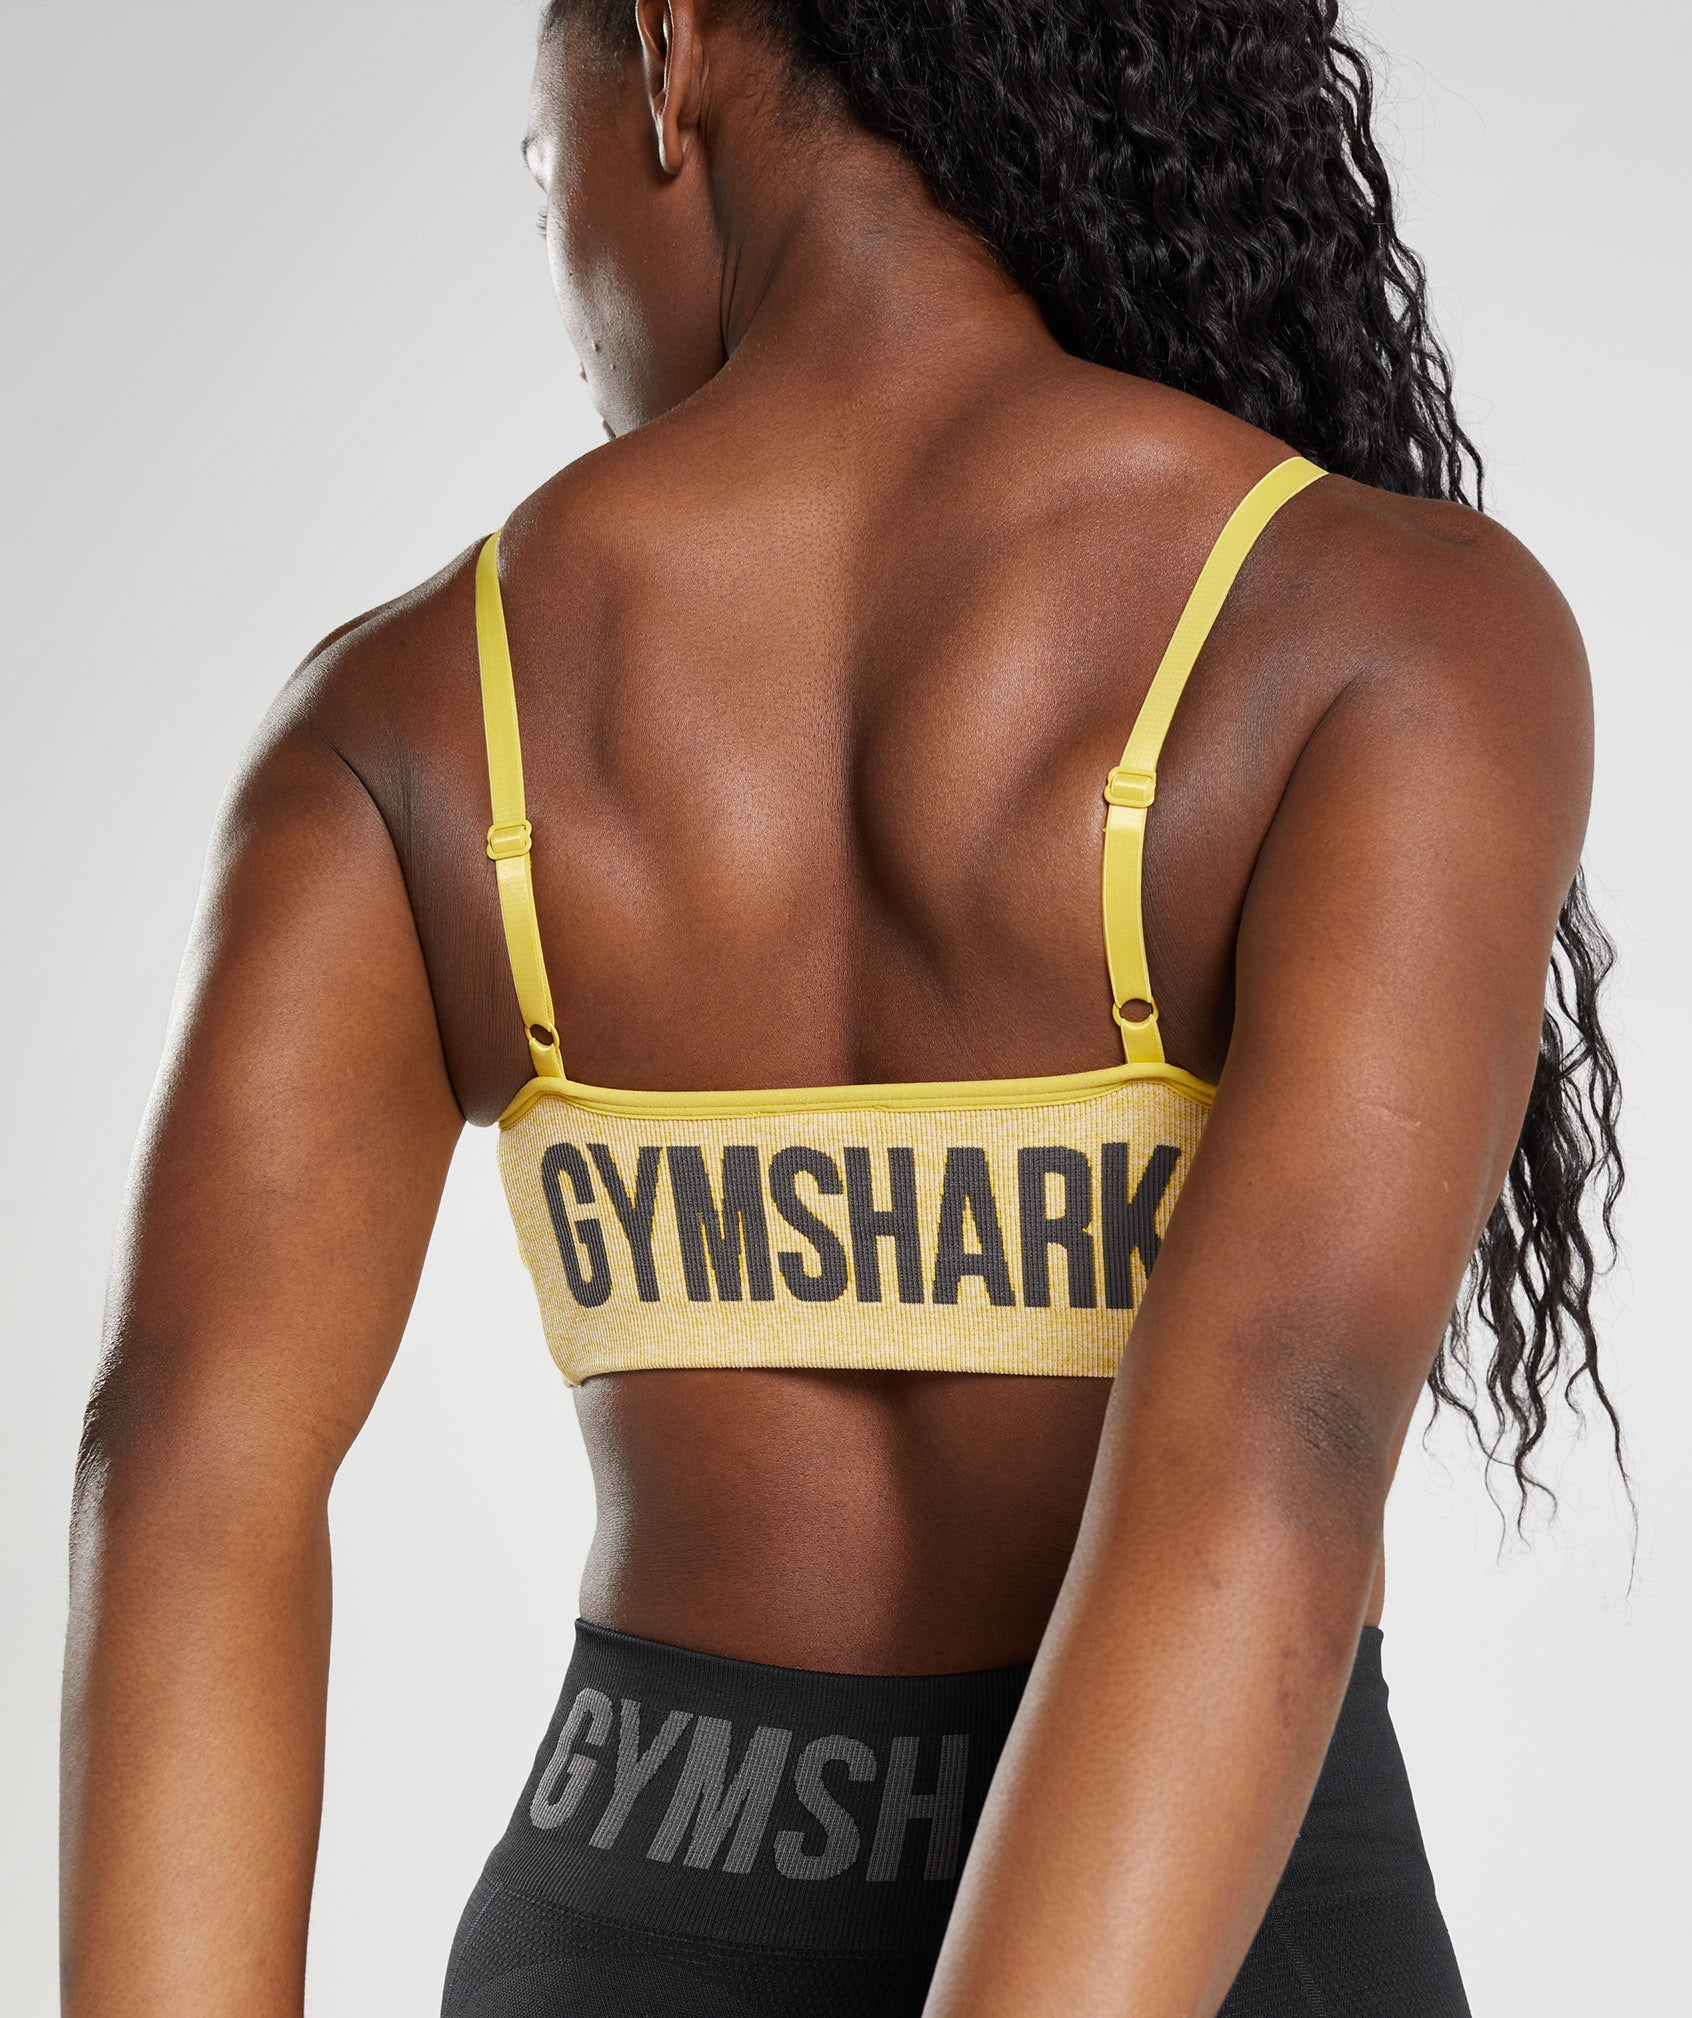 Gymshark Flex Strappy Sports Bra - $25 New With Tags - From Junior